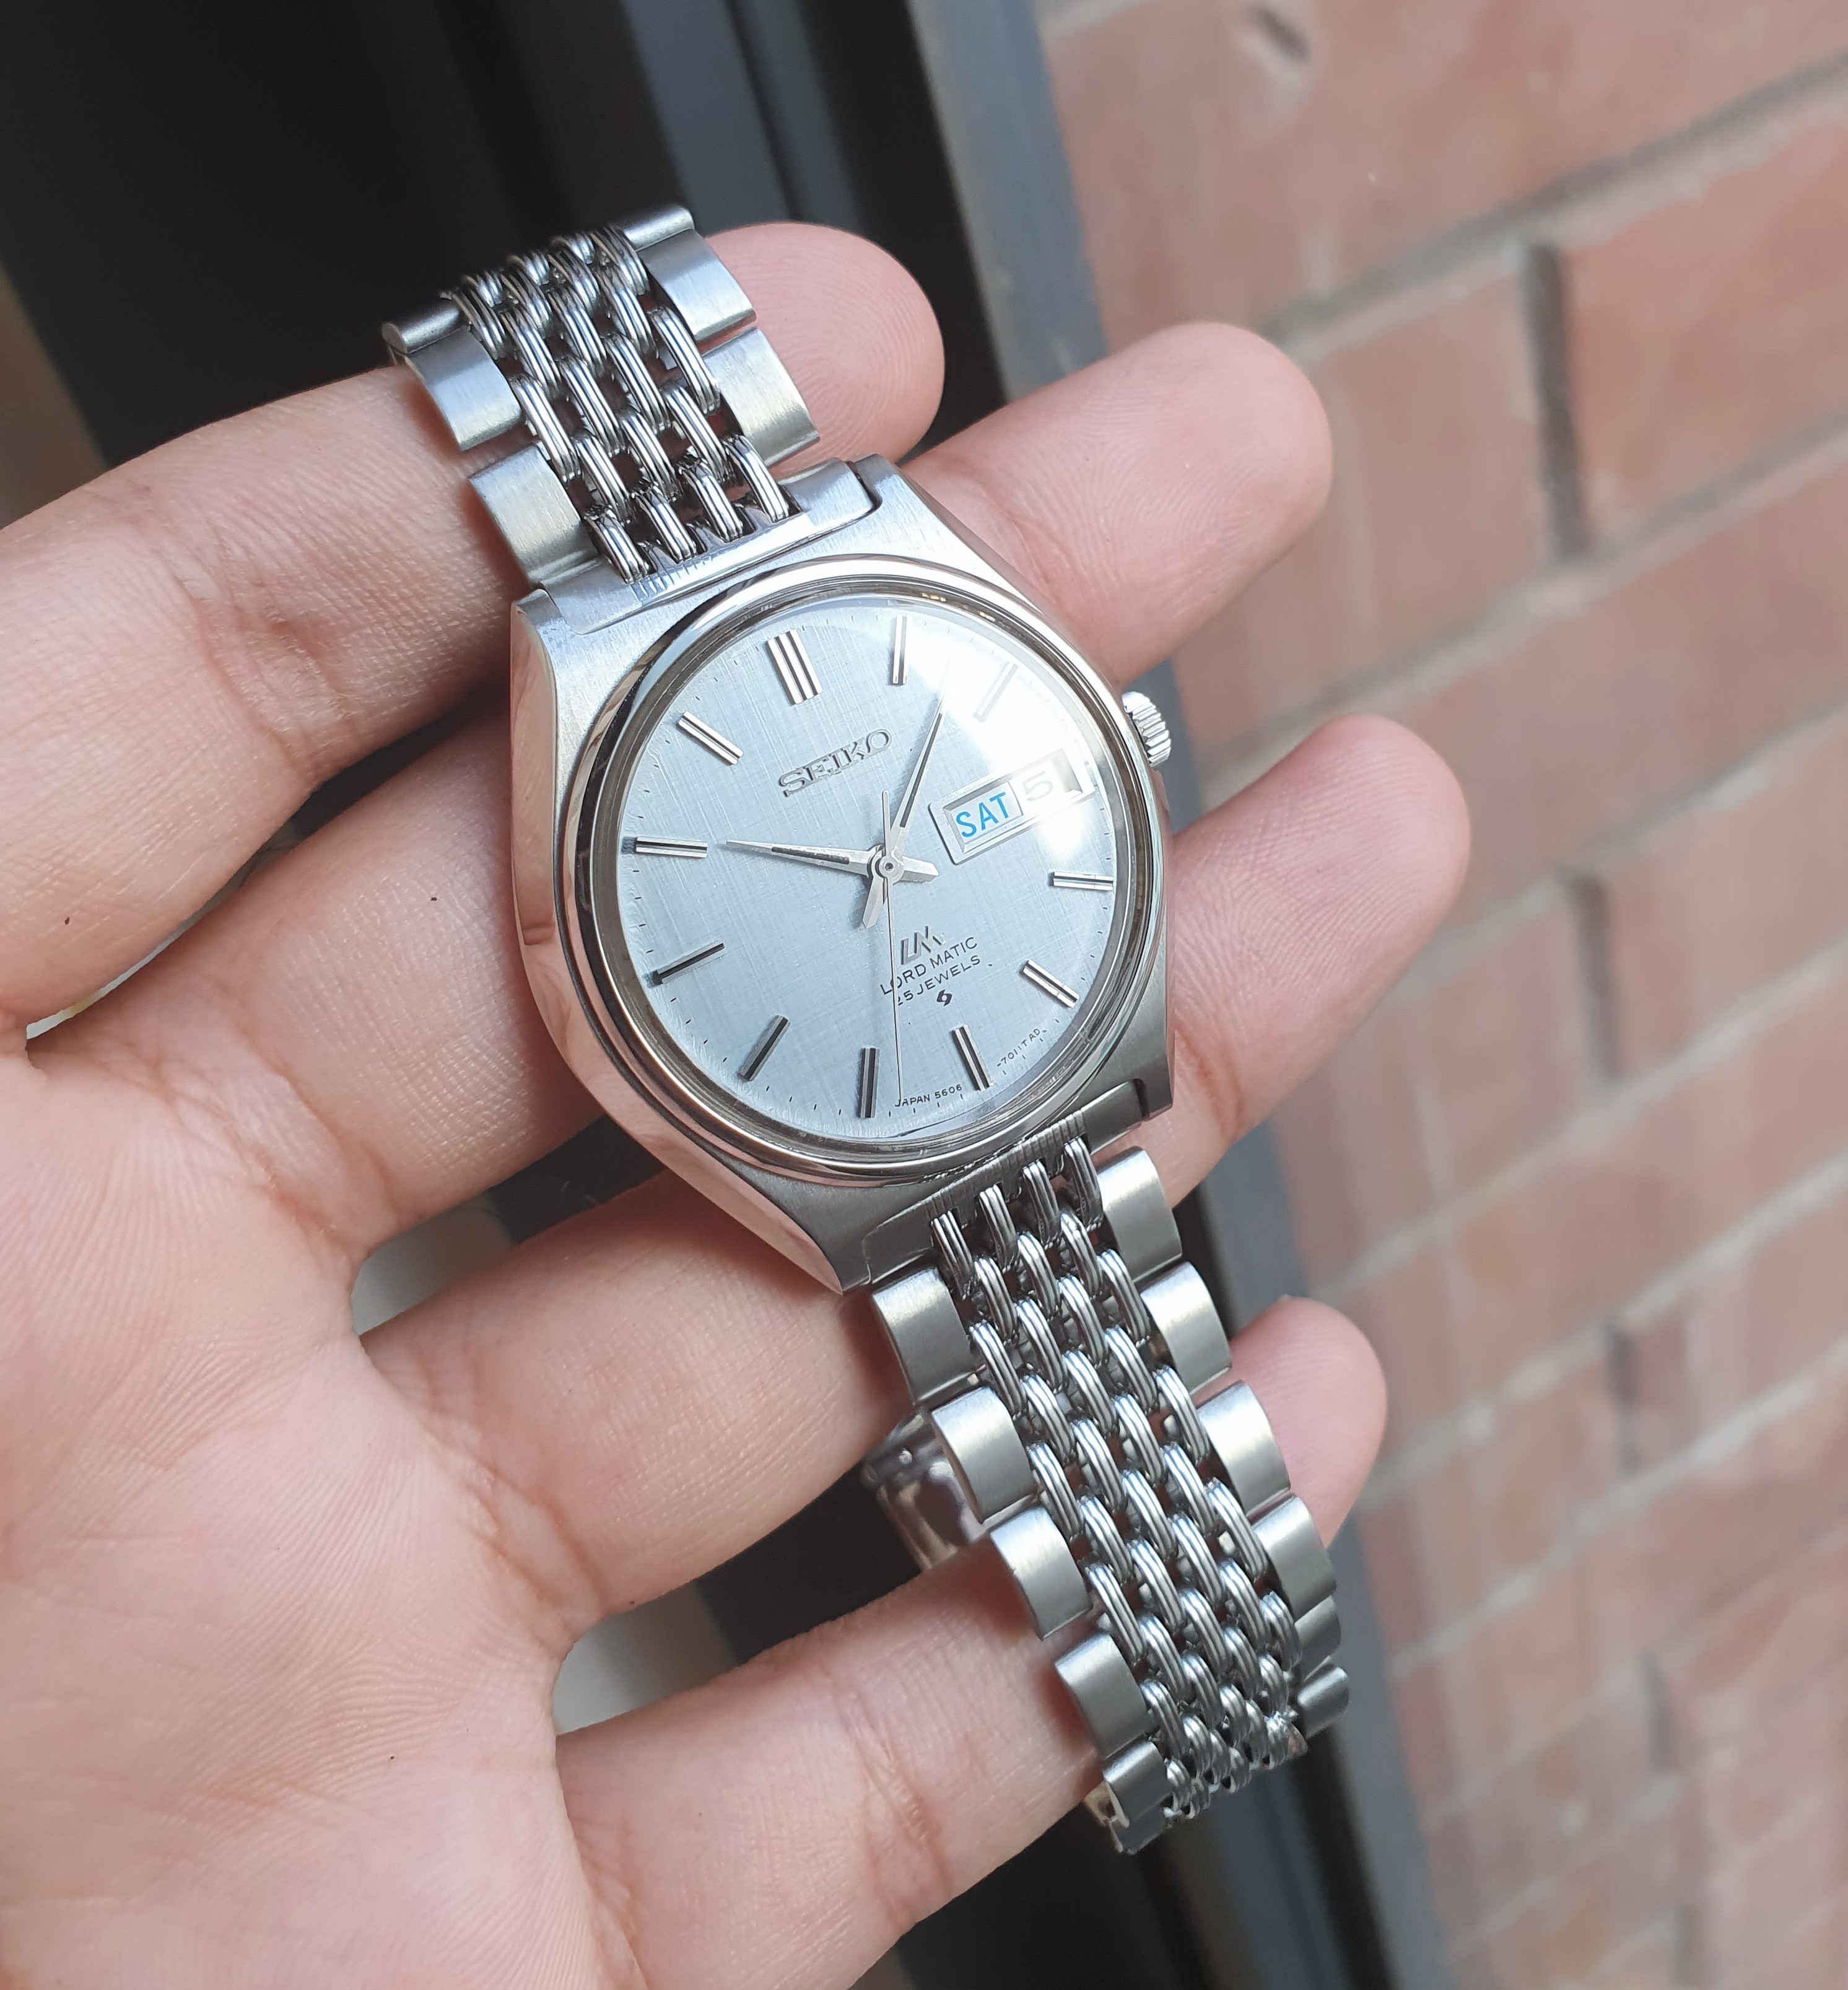 419 USD] FS: Seiko 1969 Ice Blue Linen Lord Matic LM SERVICED Stunning JDM  Rare Watch $419 Shipped | WatchCharts